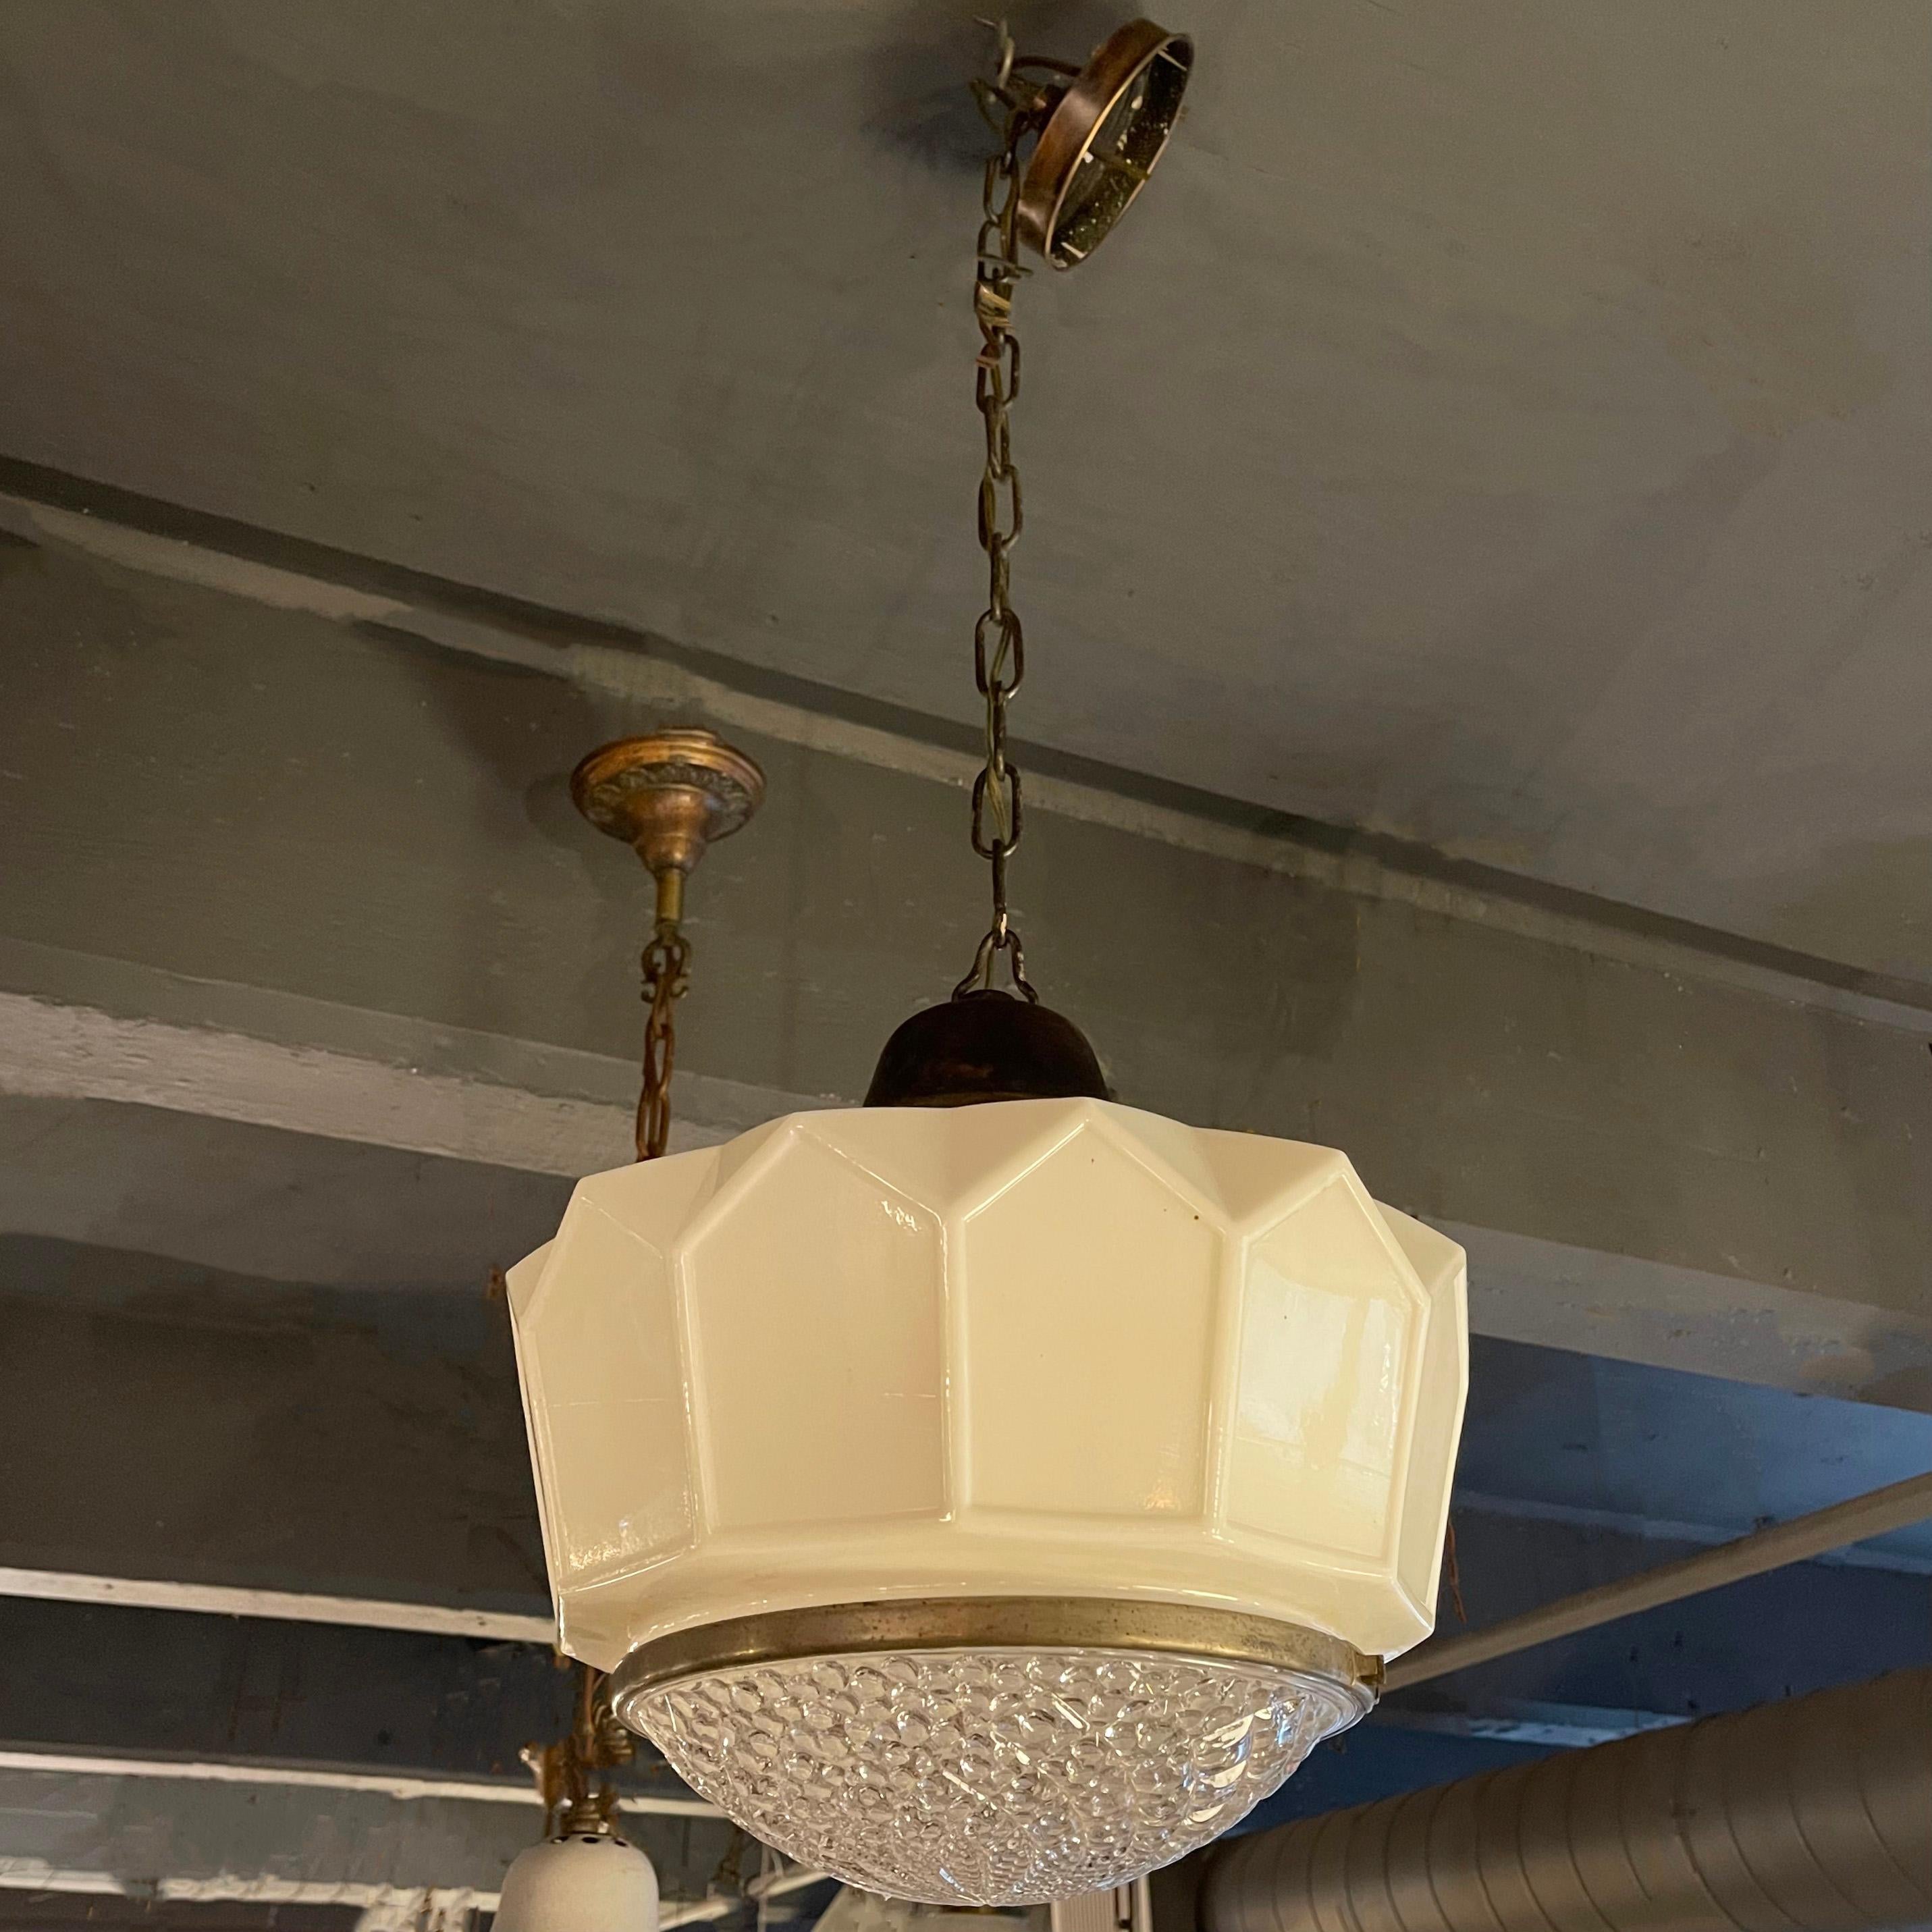 Art deco pendant light features a faceted milk glass shade with brass trimmed, textured clear glass diffuser on brass fitter, chain and canopy. The shade measures 13 inches ht and the overall height of the pendant is 38 inches but can be adjusted.